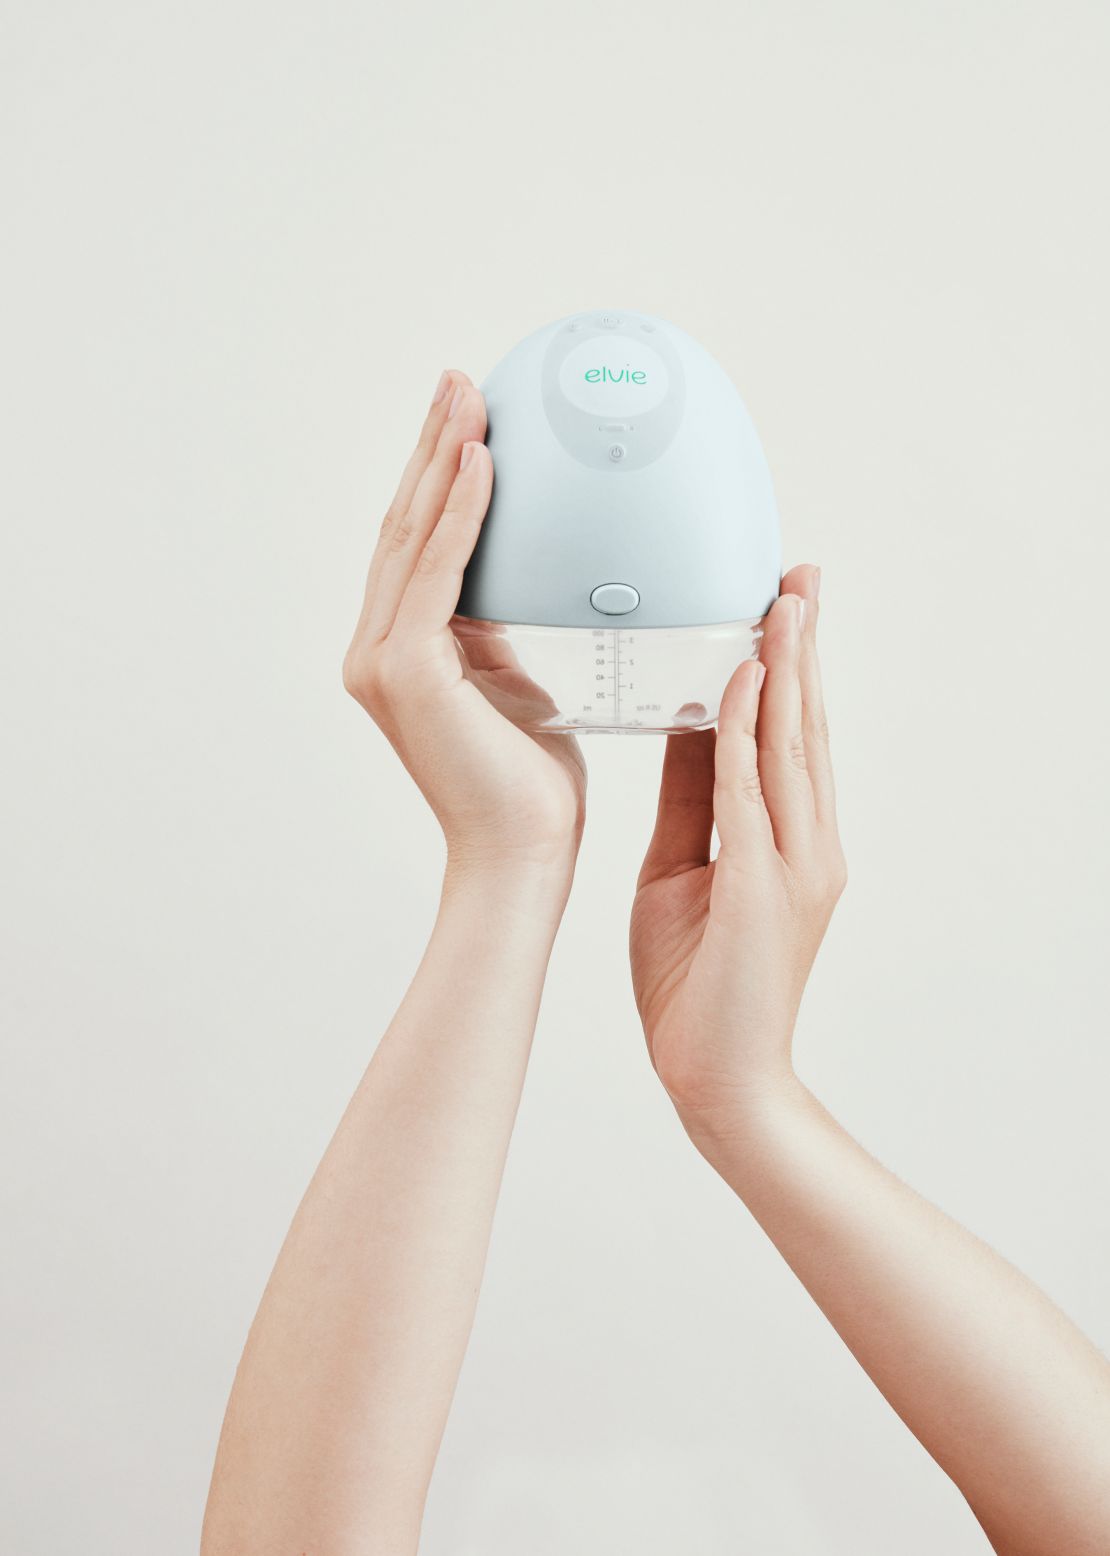 Elvie's breast pump is part of a new focus on improving breast pumps.